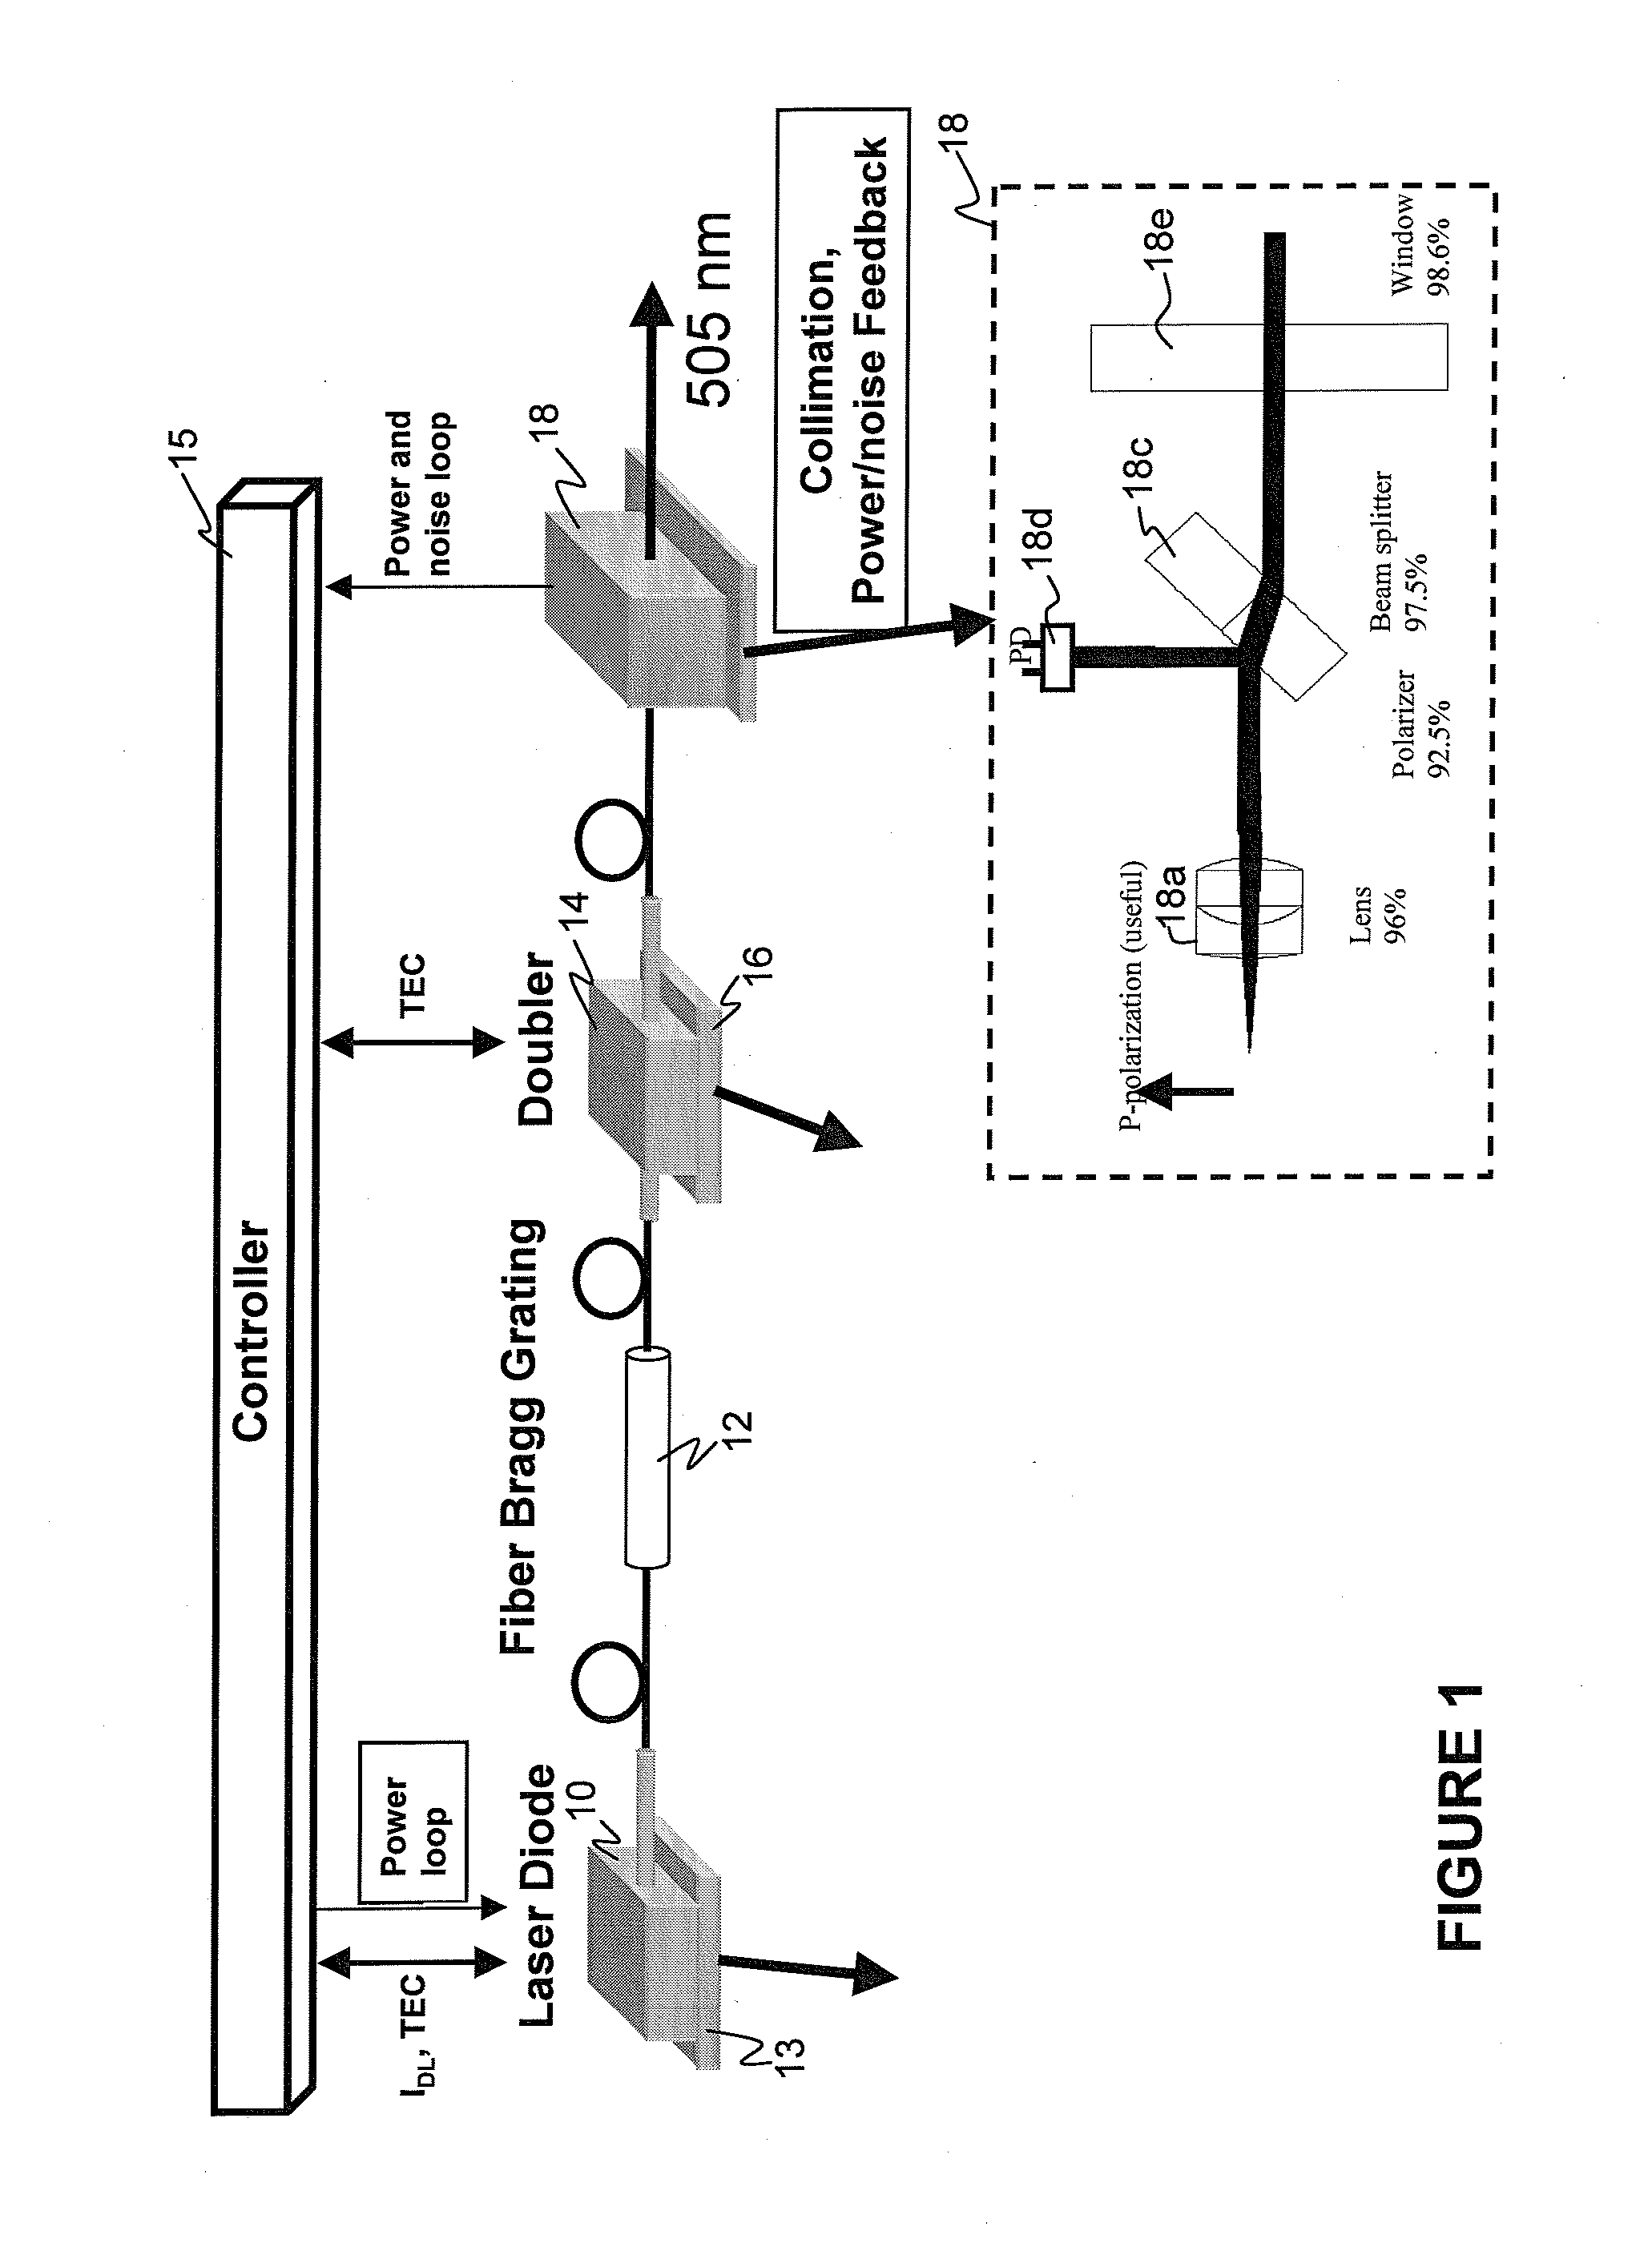 Circuit And Method For Lessening Noise In A Laser System Having A Frequency Converting Element